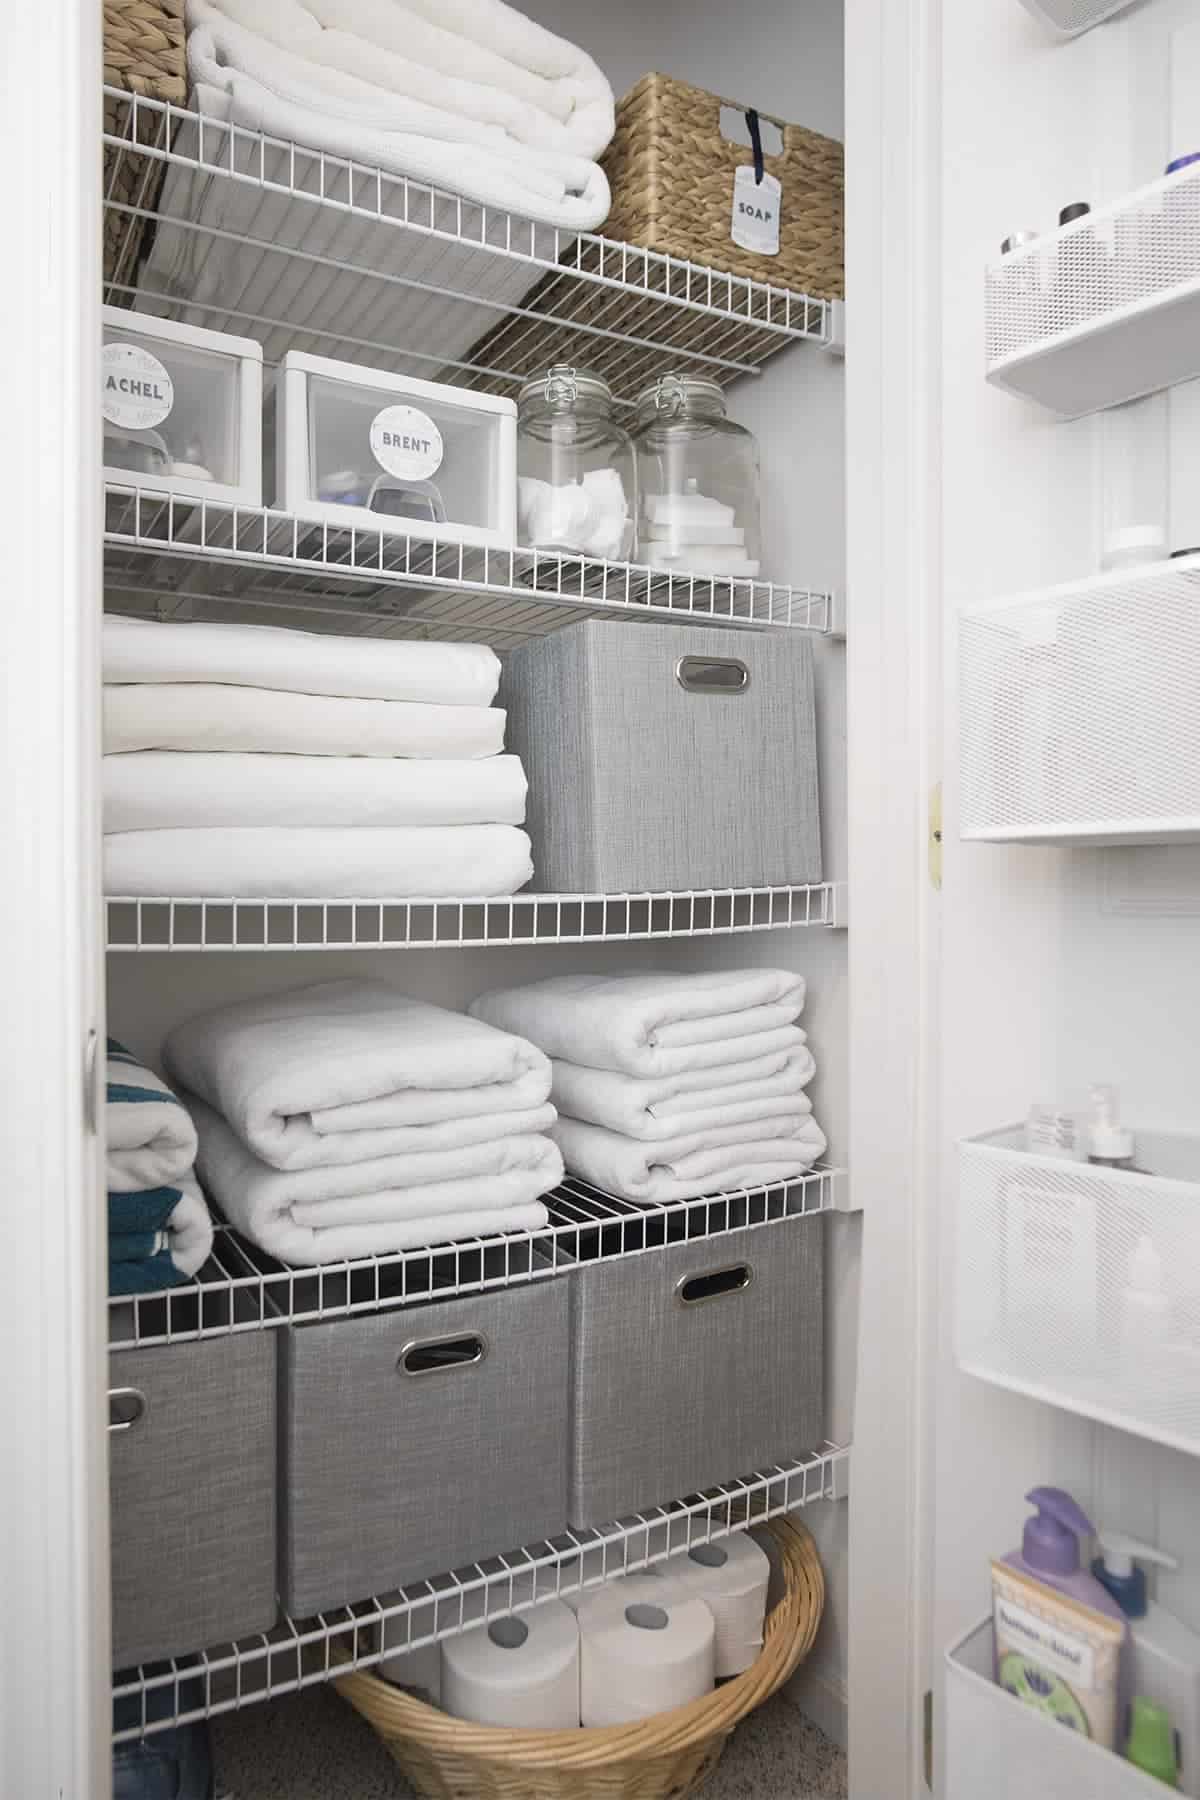 Organized linen closet with white towels and grey bins on wire shelves.